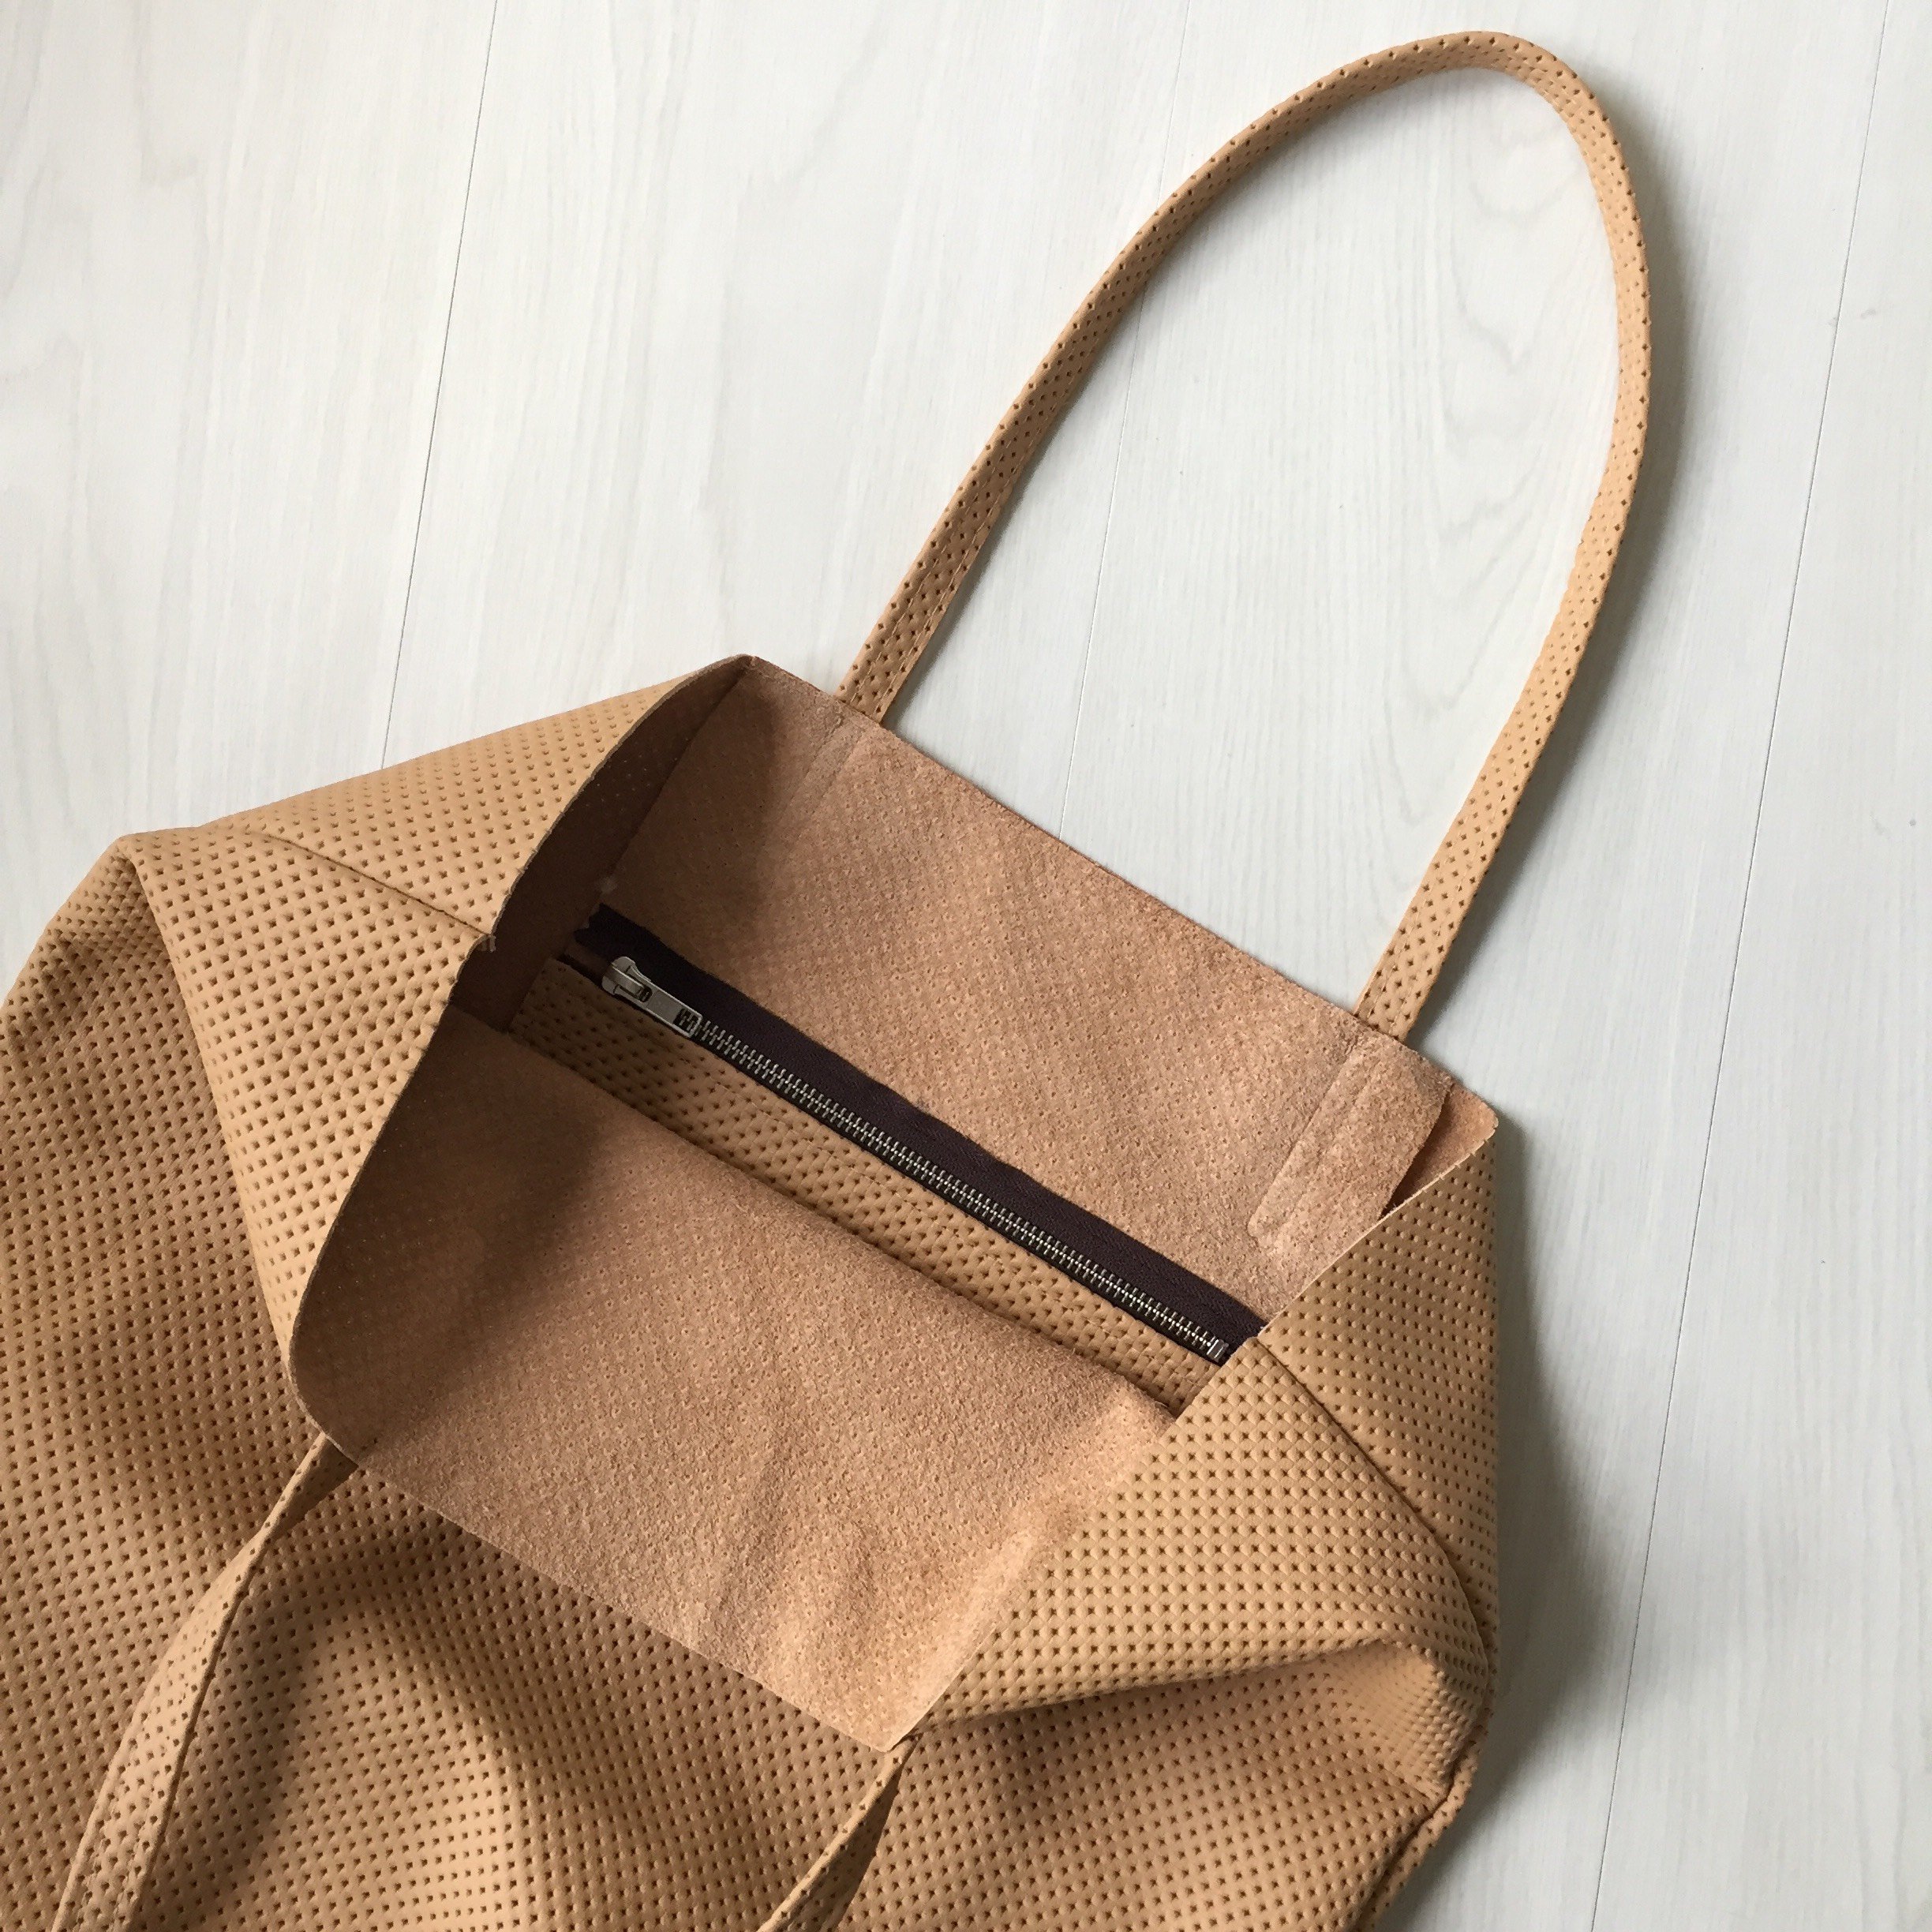 Raw Leather Tote Bag - Tan Perforated Leather